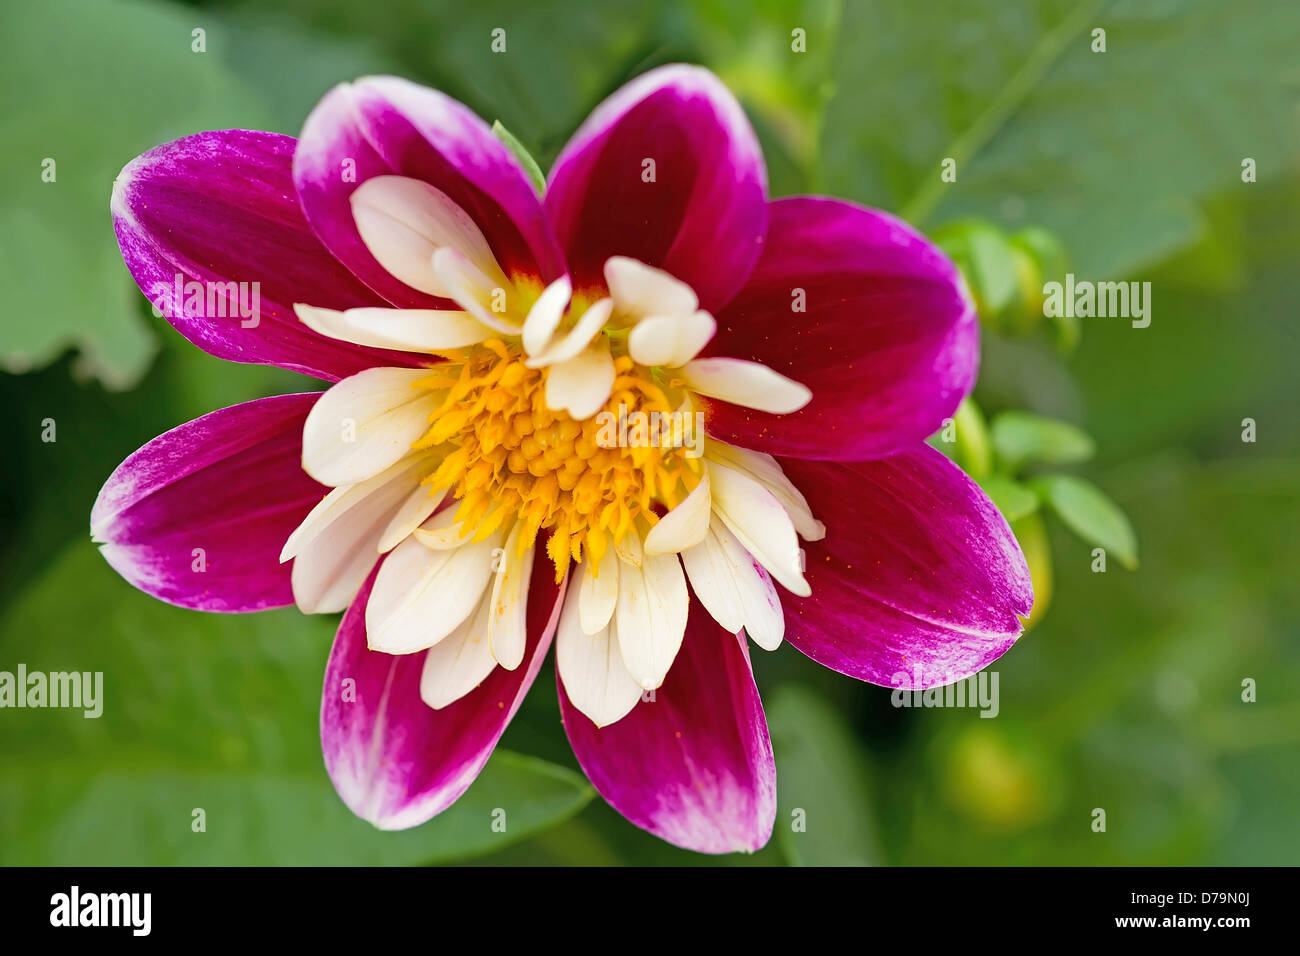 Collarette Dahlia cultivar flower with yellow centre surrounded by cream petals, surrounded by larger outer petals of dark pink. Stock Photo